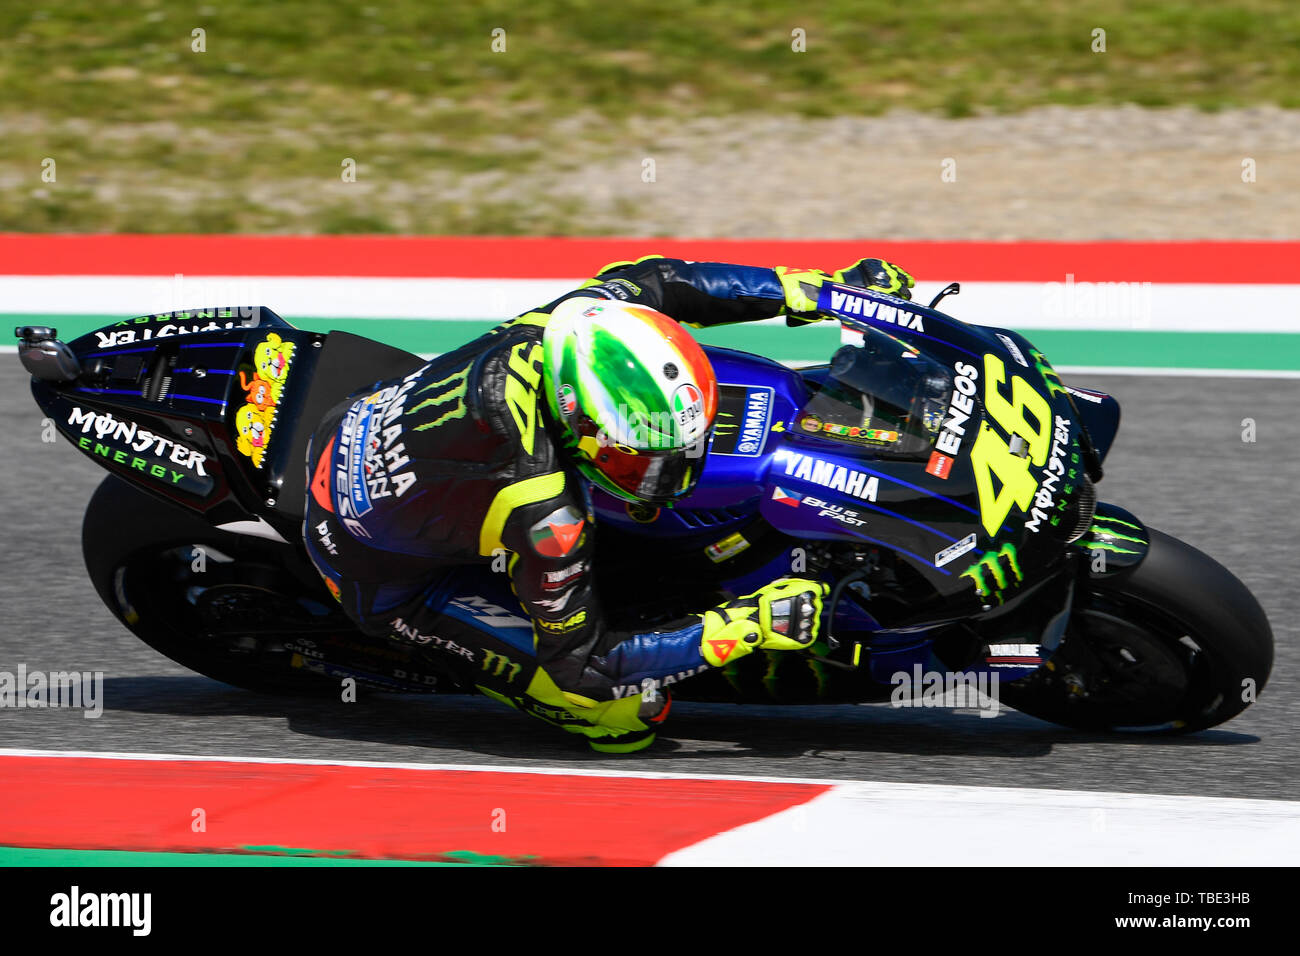 Mugello, Italy. 01st June, 2019. 46 Valentino Rossi during the FP3 Credit:  Independent Photo Agency/Alamy Live News Stock Photo - Alamy